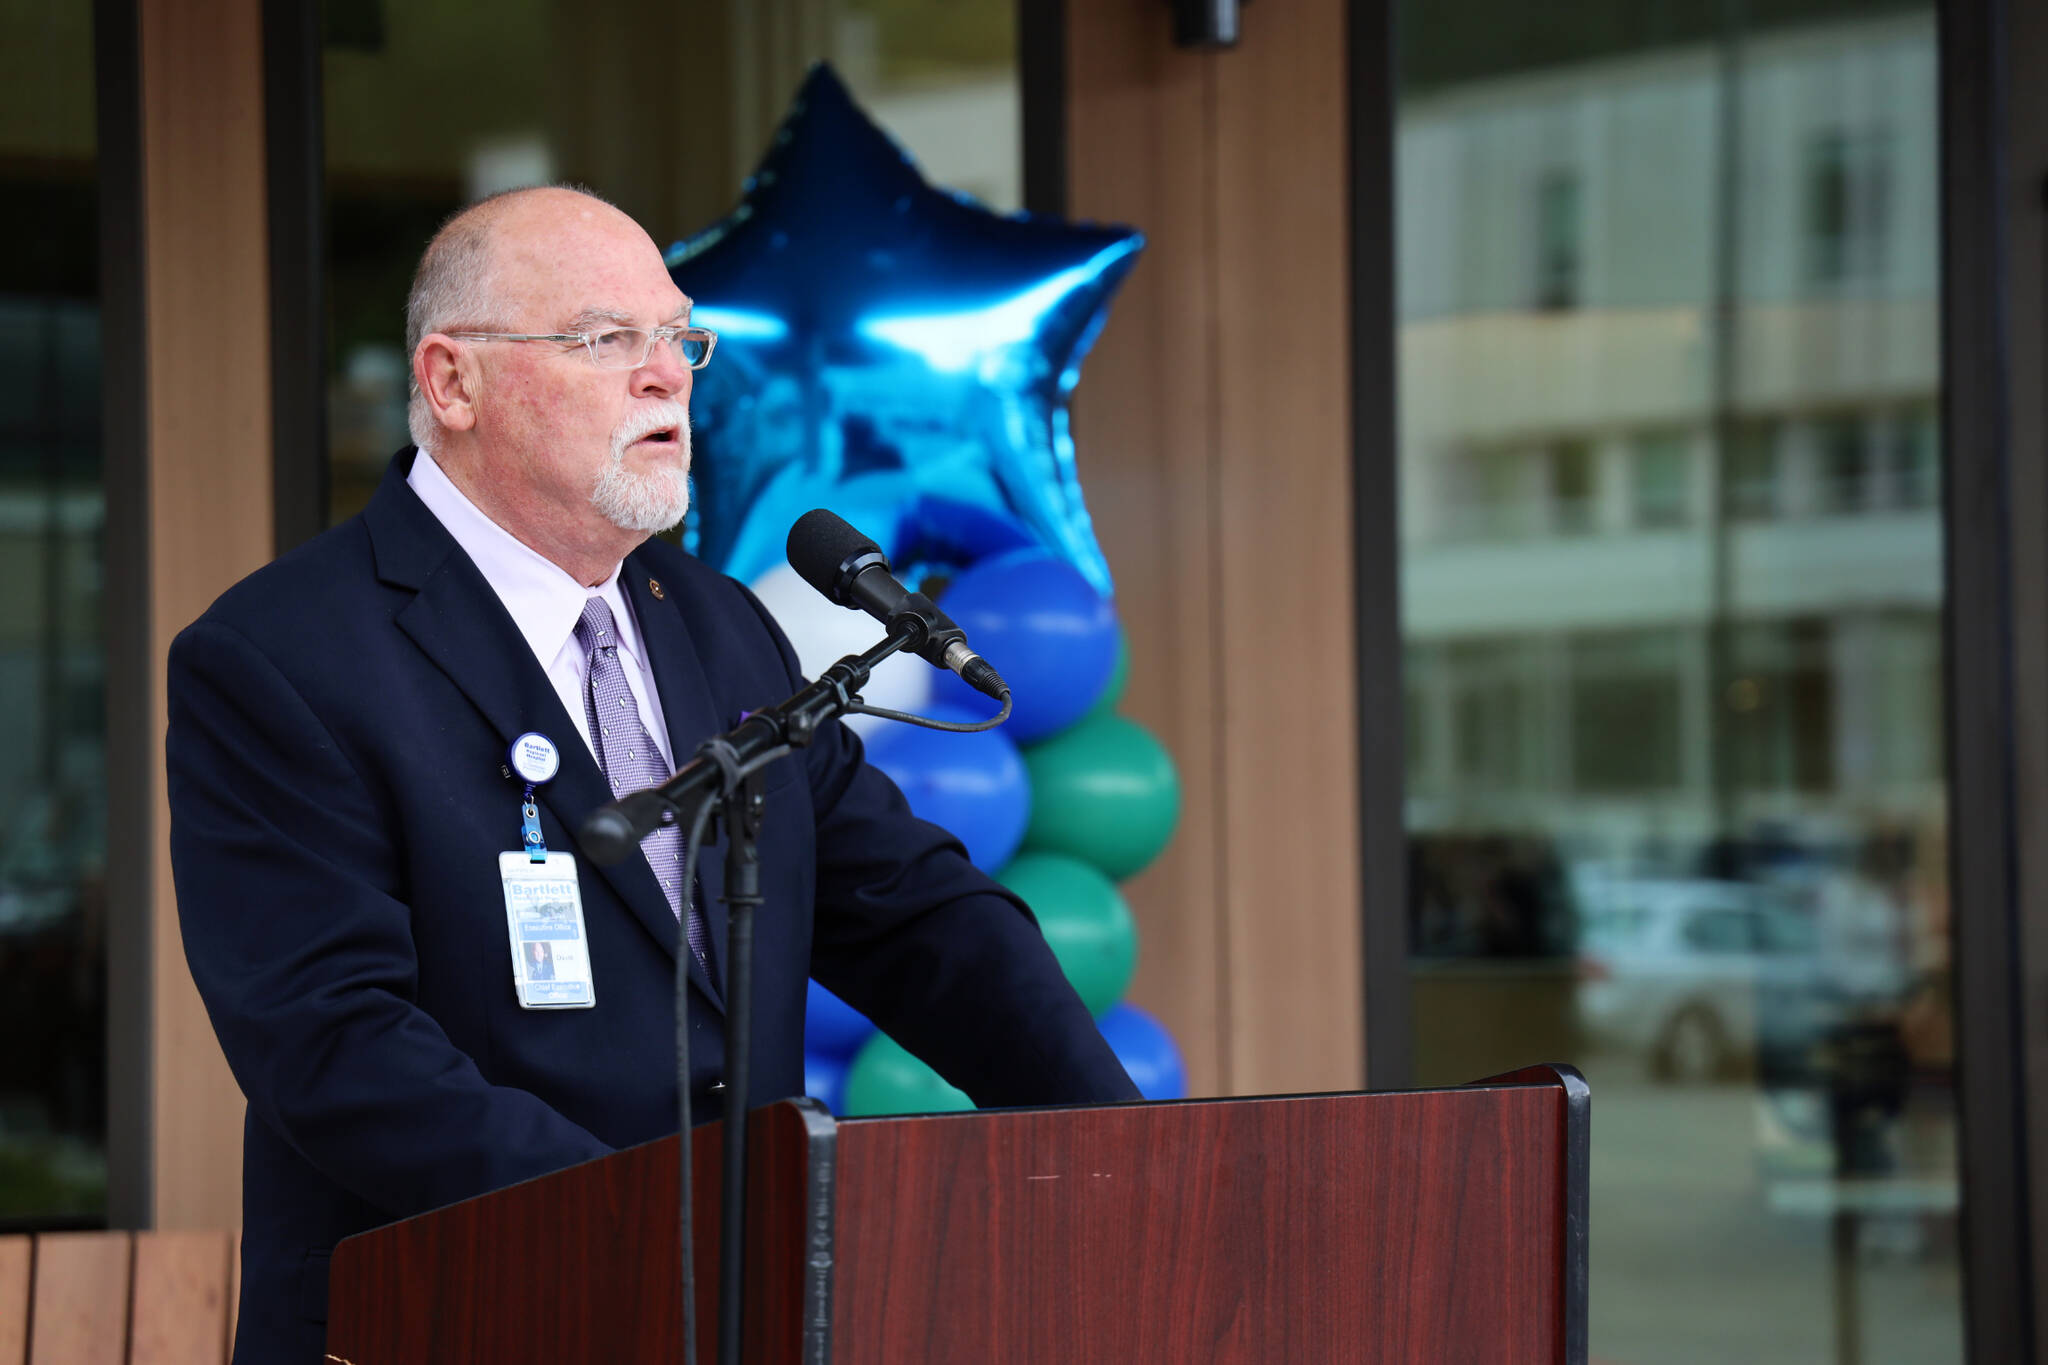 Hospital CEO David Keith speaks to residents and hospital officials who gathered at Bartlett Regional Hospital’s new behavioral health and crisis stabilization center unveiling in June. On Tuesday hospital officials announced his resignation after less than a year in the position. (Clarise Larson / Juneau Empire File)